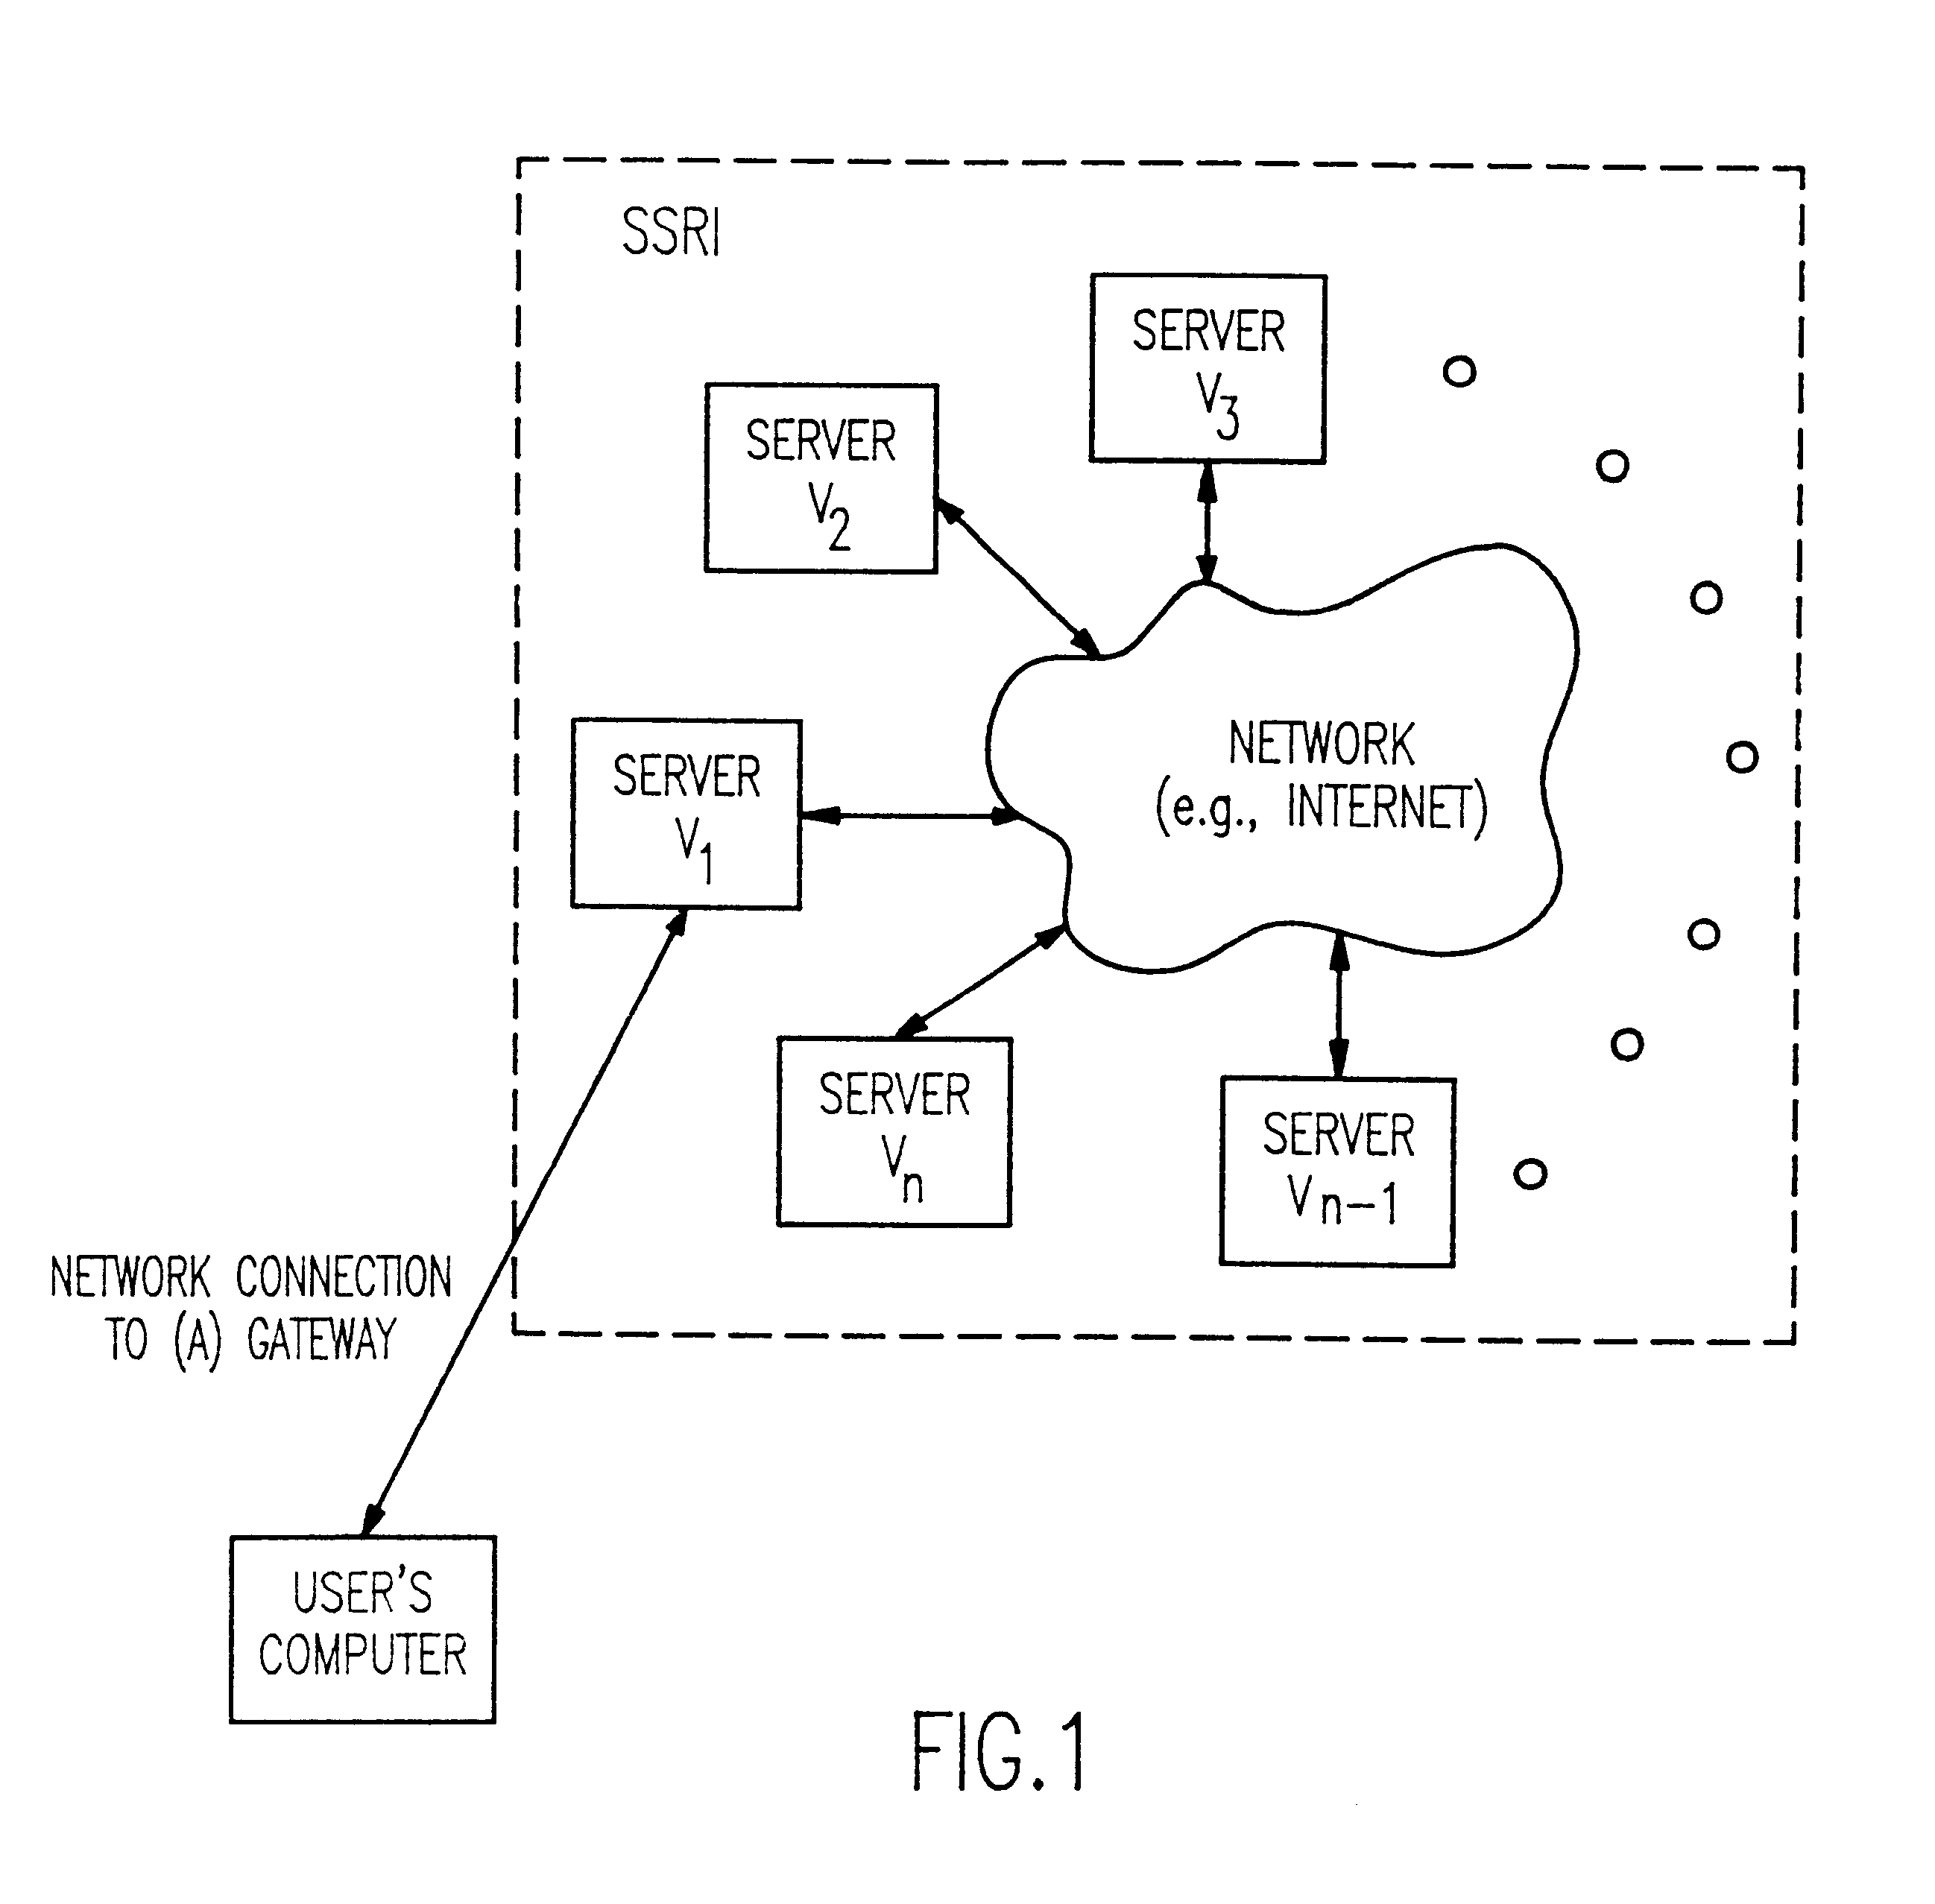 Method and apparatus for the secure distributed storage and retrieval of information